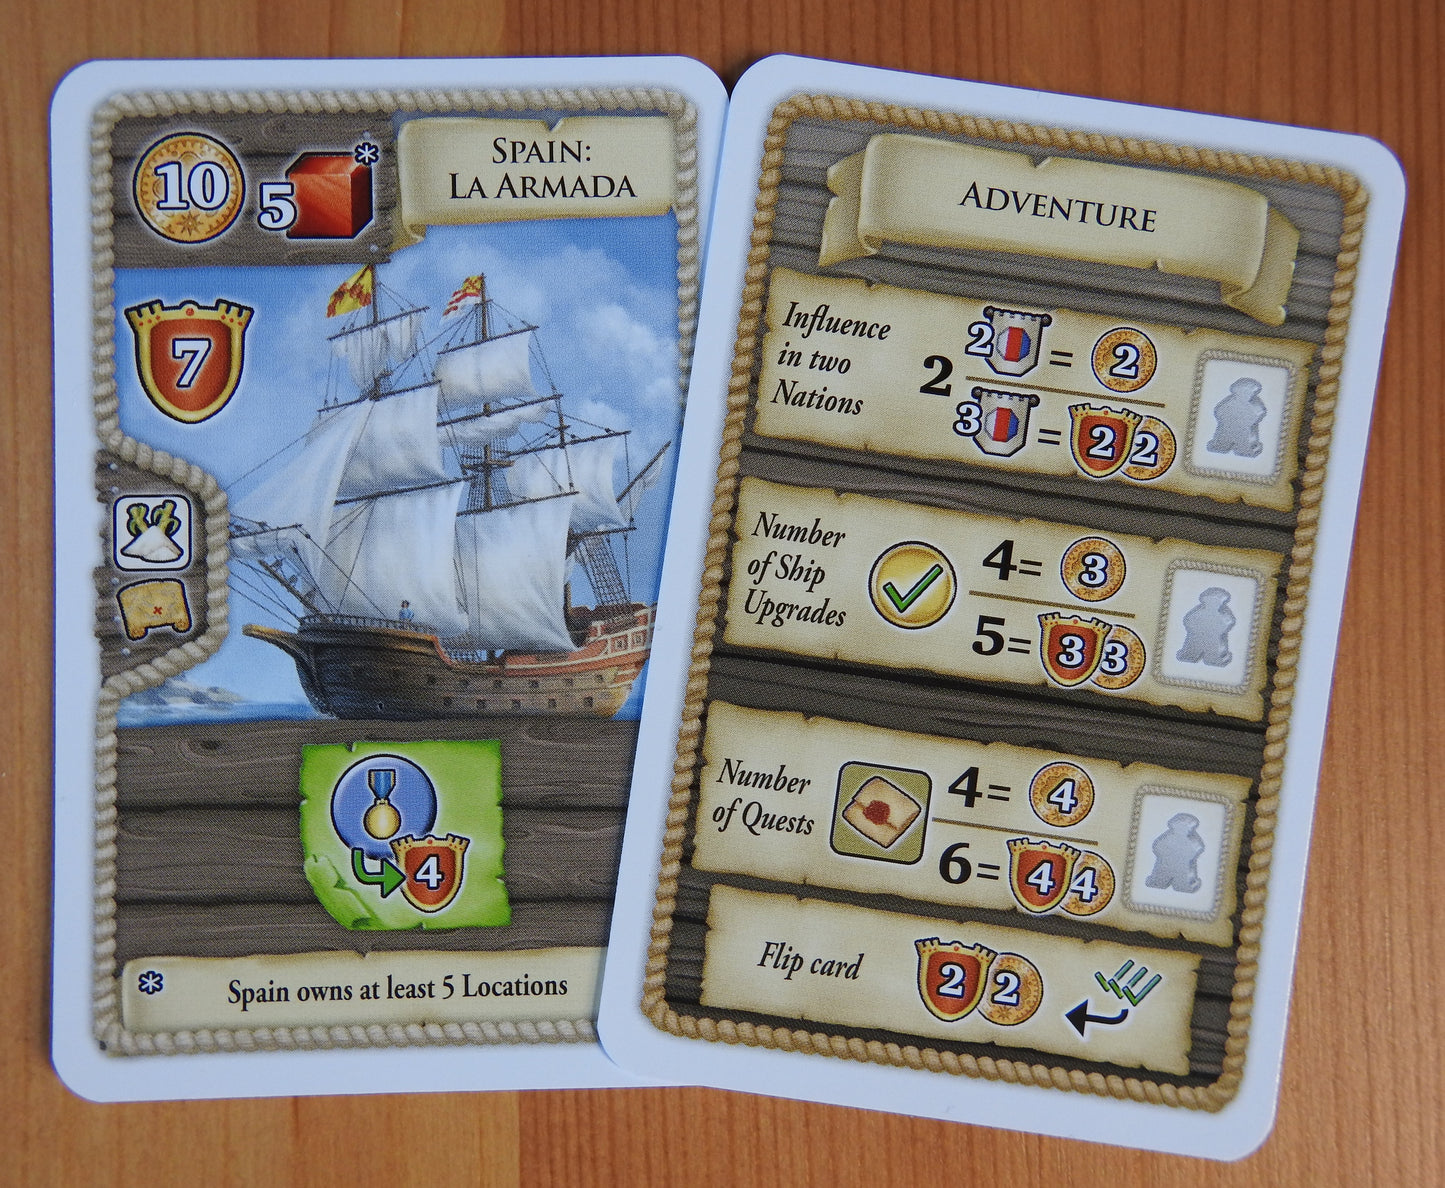 Close-up view of 2 cards: Spain: La Armada and the Adventure card.